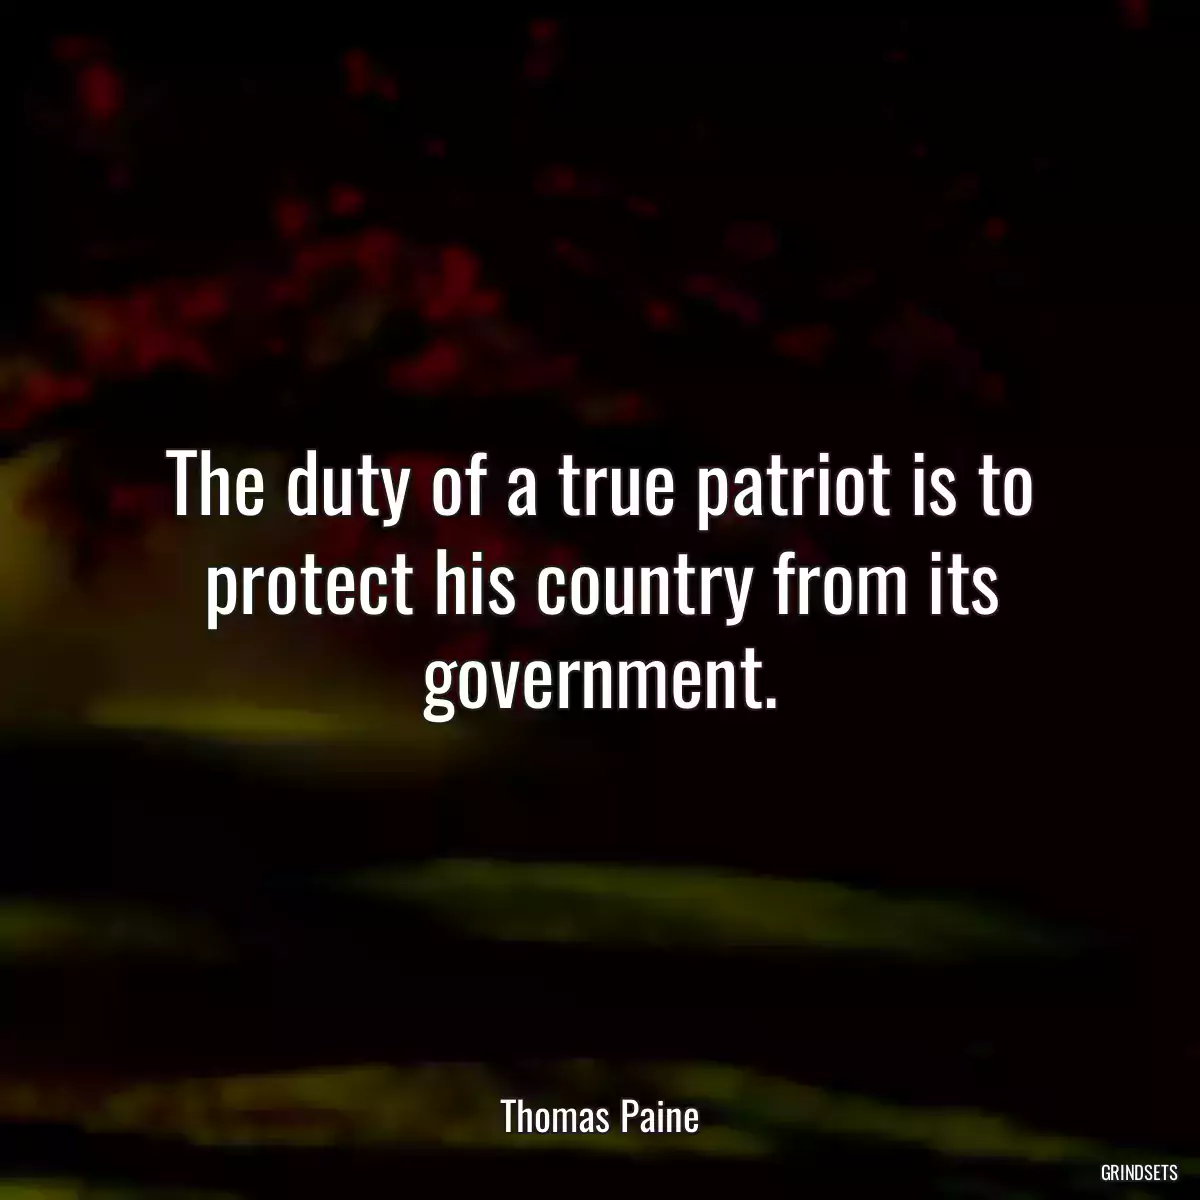 The duty of a true patriot is to protect his country from its government.